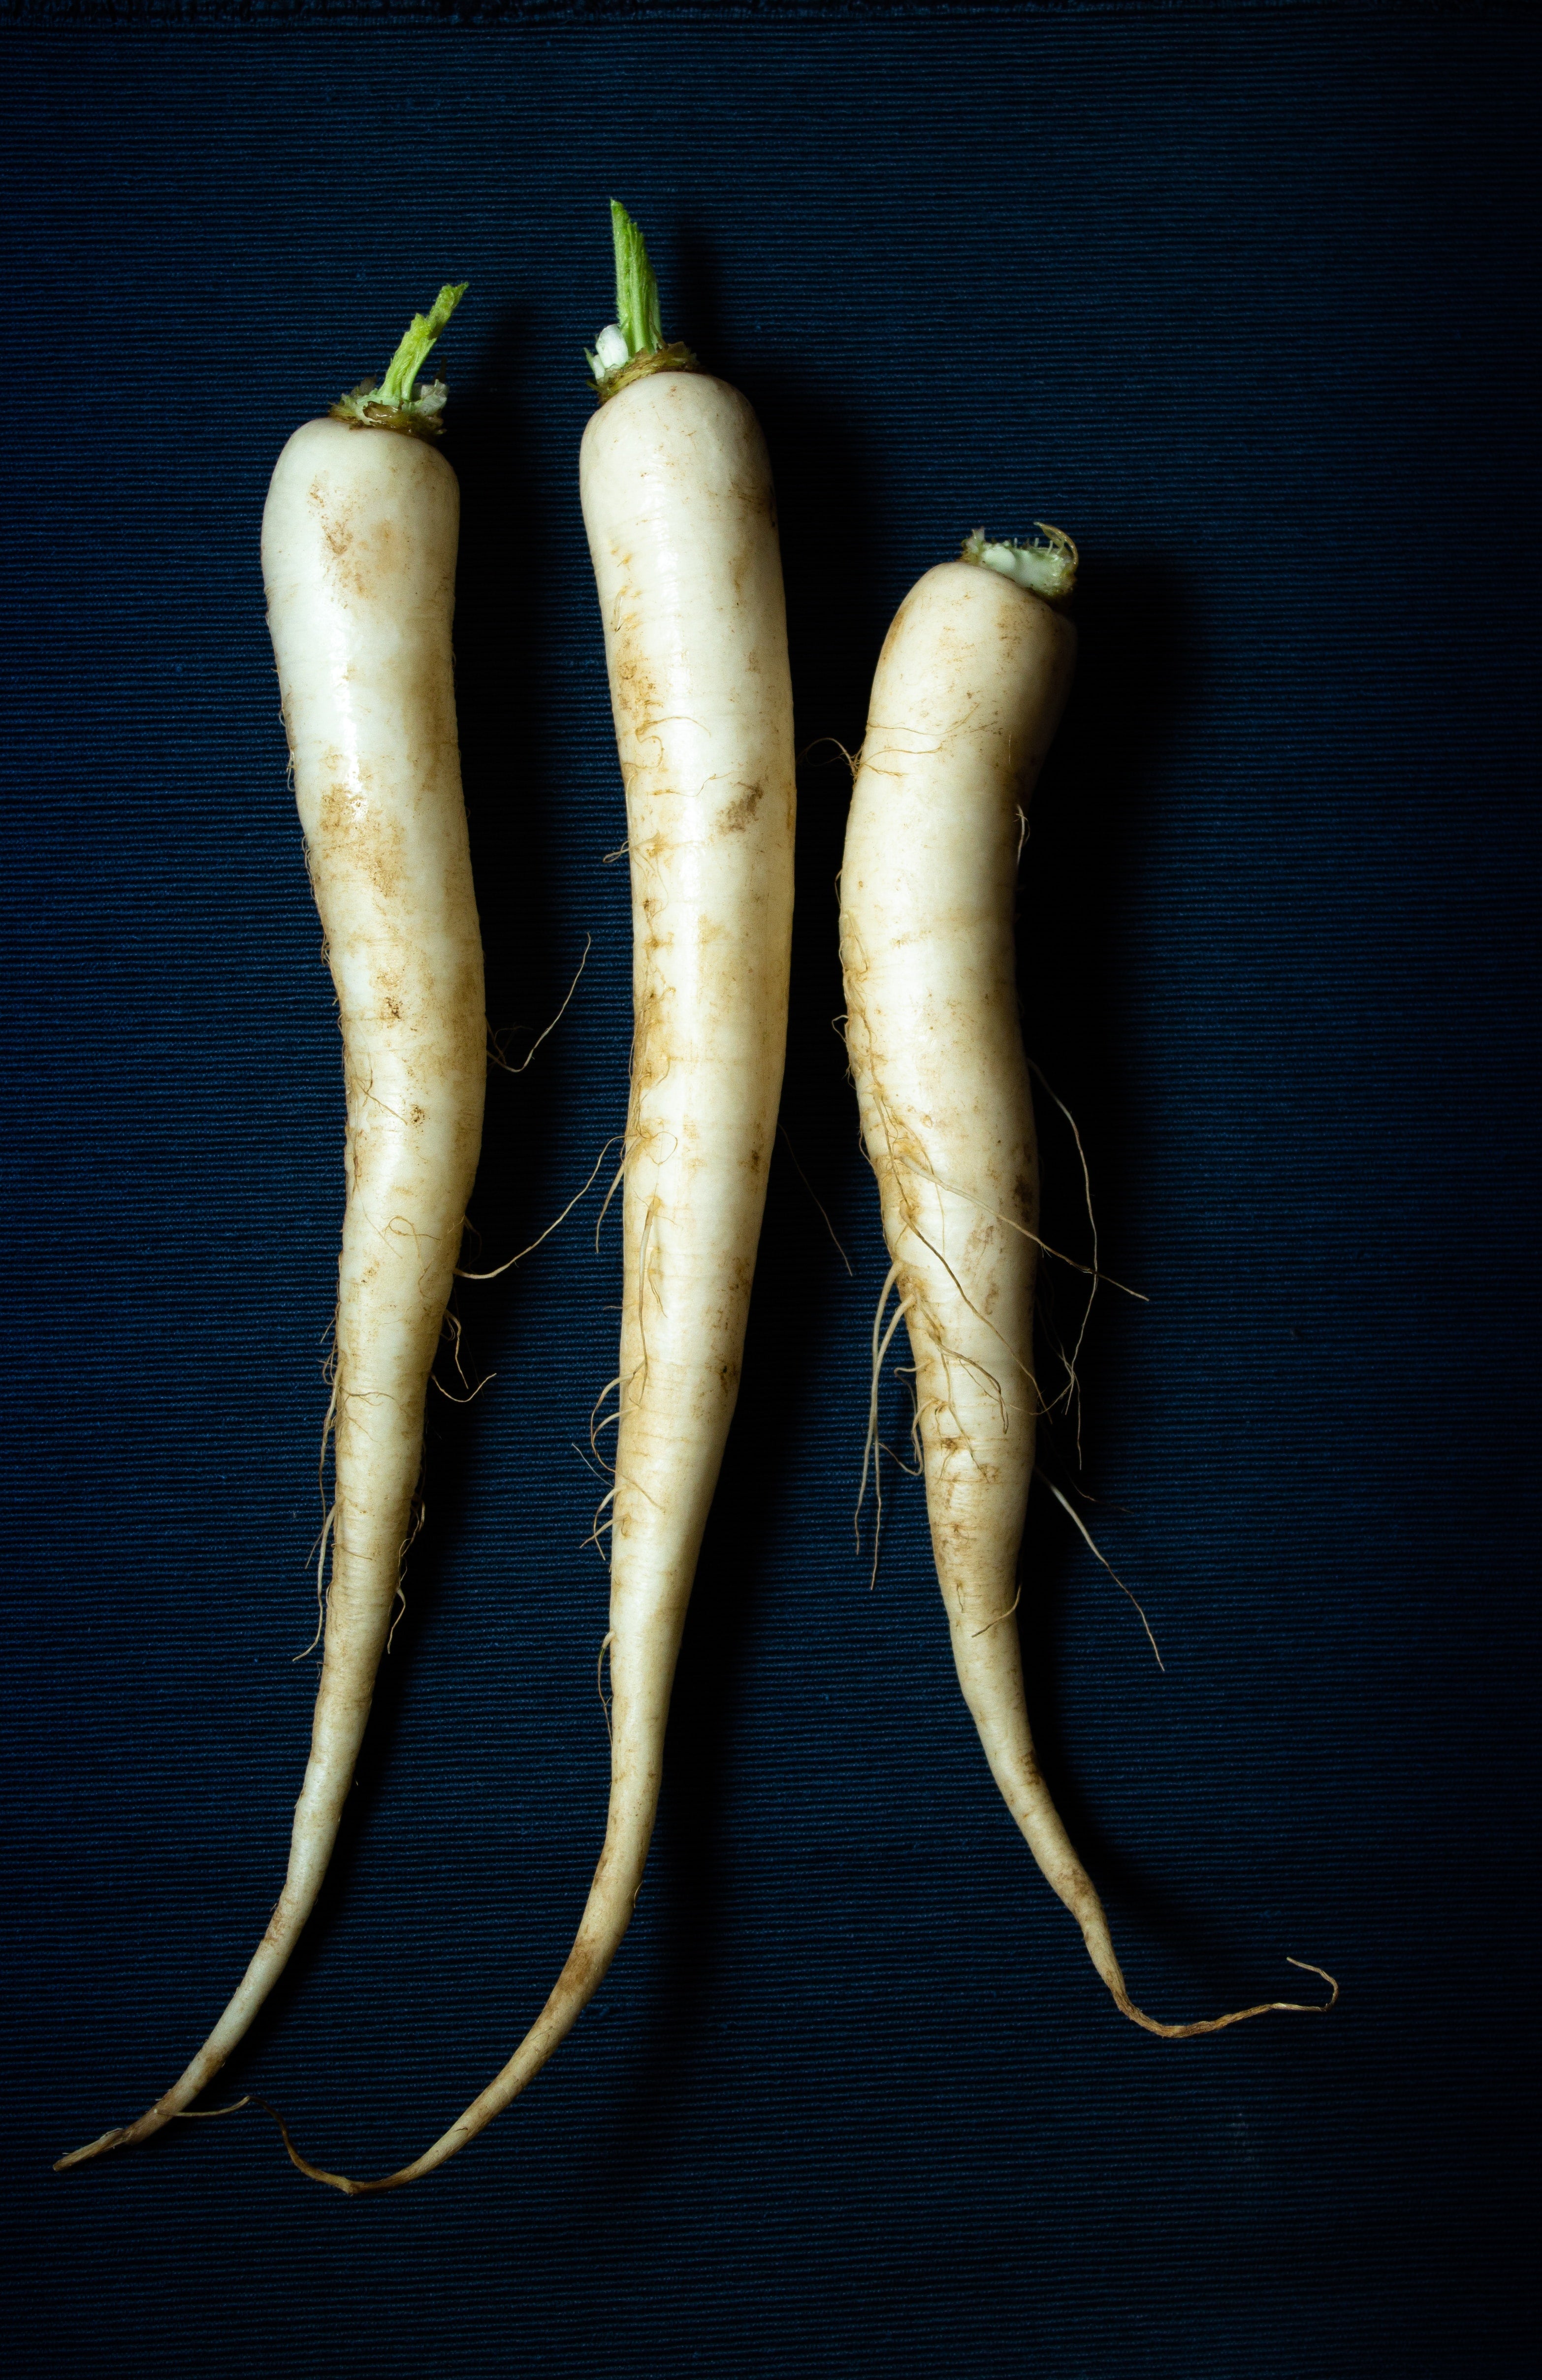 Radish-ical Delights: Rooting for Health and Flavor with 3 Savory Radish-Centric Dishes